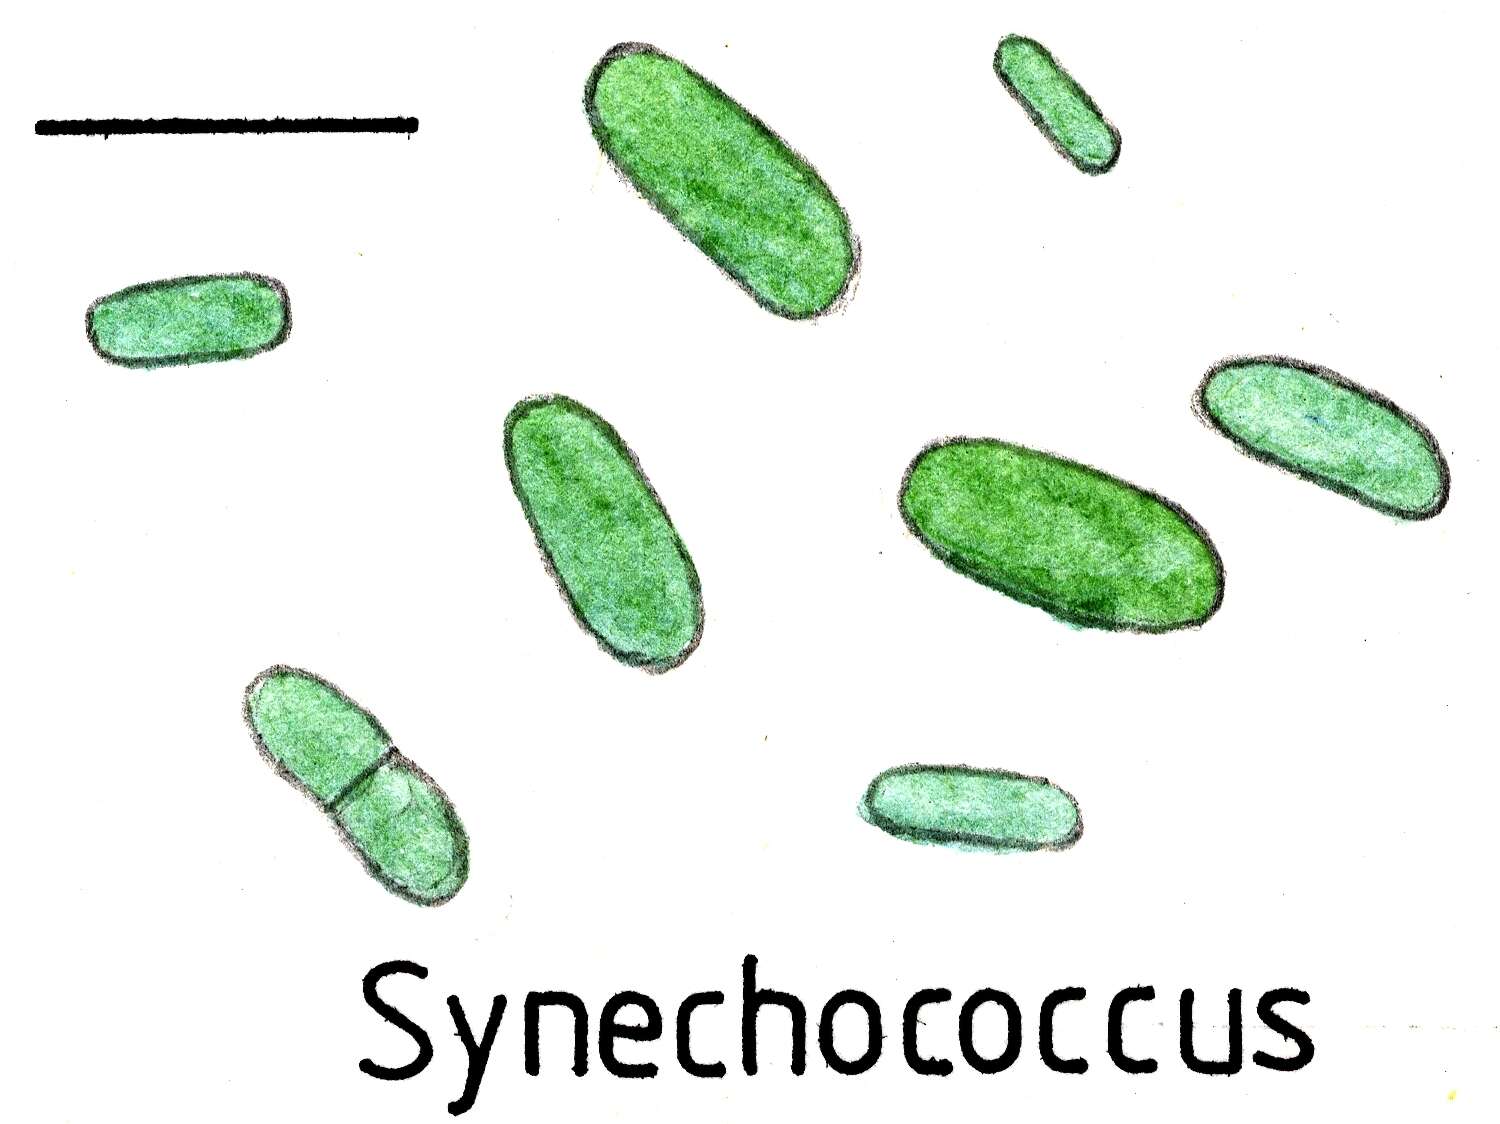 Image of Synechococcaceae